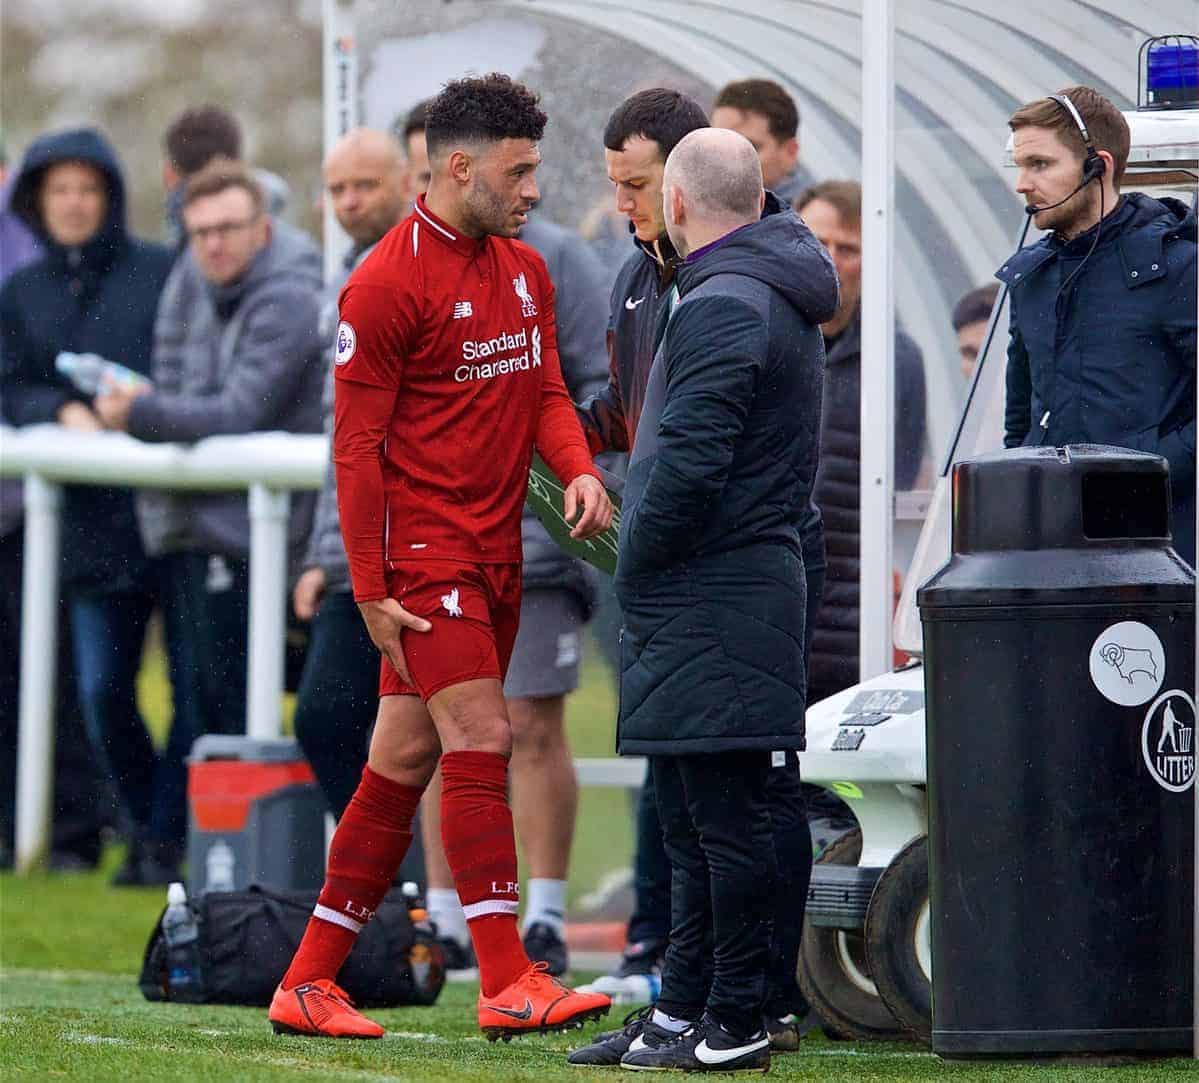 DERBY, ENGLAND - Friday, March 8, 2019: Liverpool's Alex Oxlade-Chamberlain walks off after being substituted during the FA Premier League 2 Division 1 match between Derby County FC Under-23's and Liverpool FC Under-23's at the Derby County FC Training Centre. (Pic by David Rawcliffe/Propaganda)